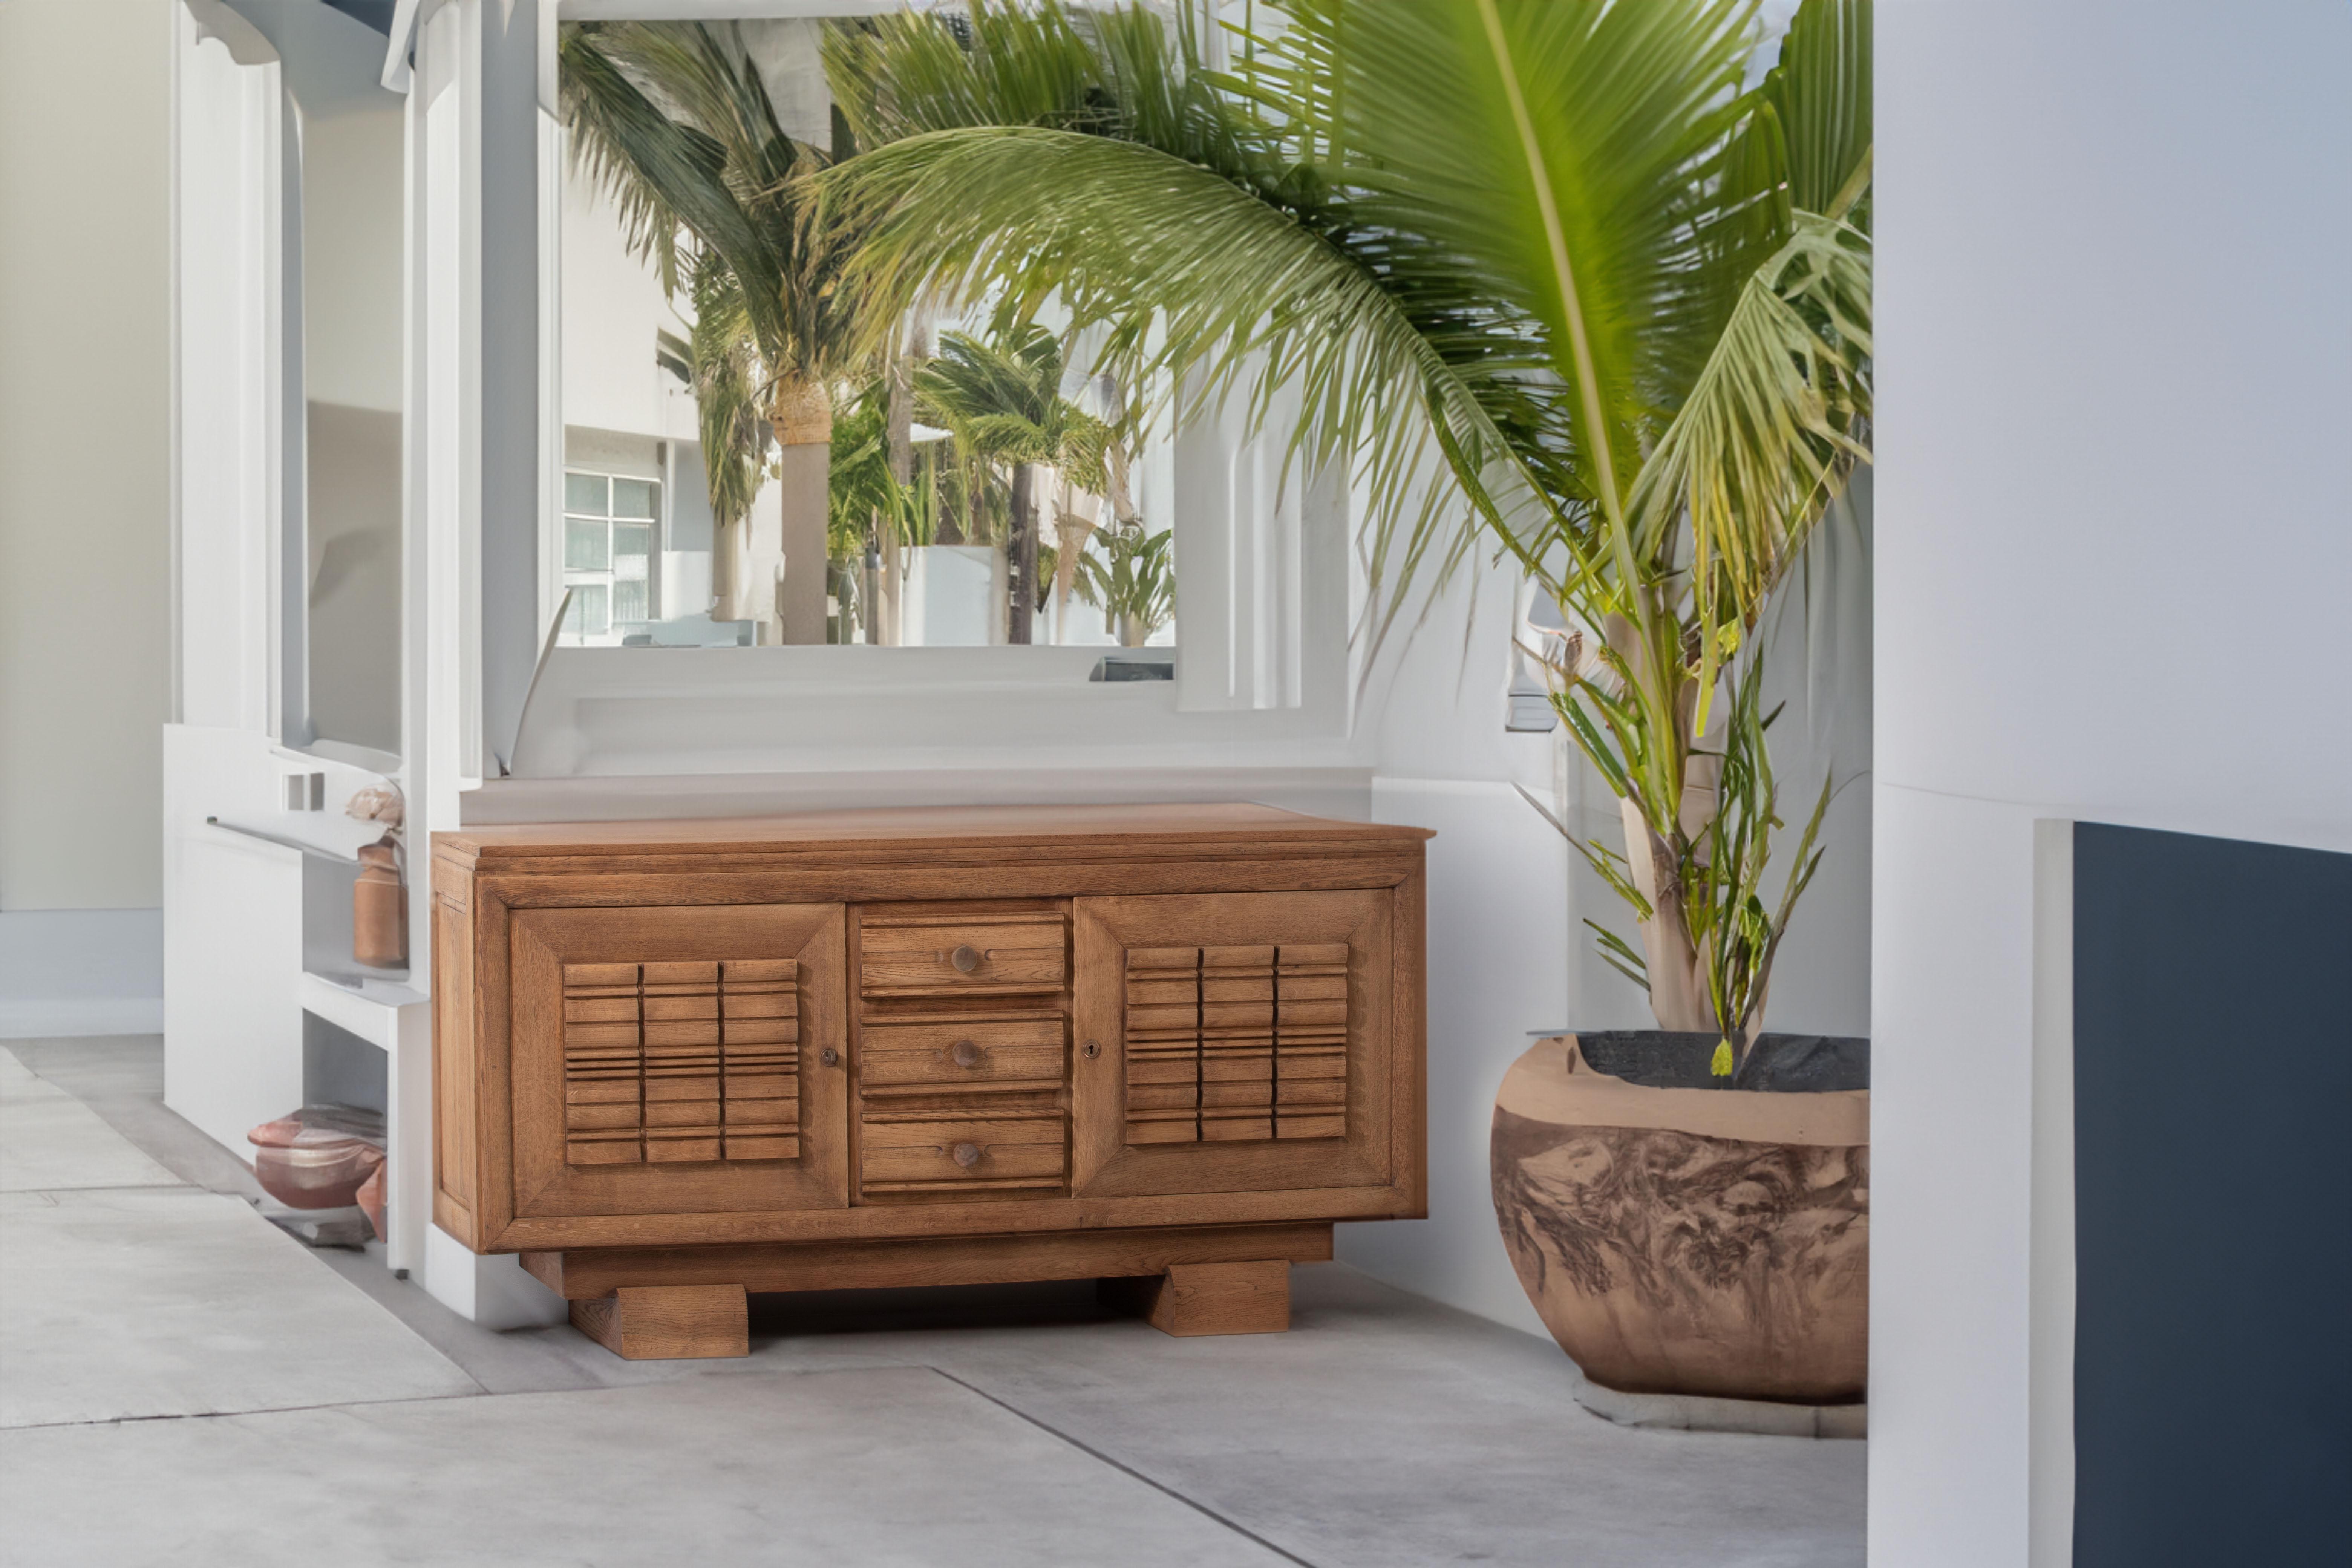 Introducing a magnificent French oak sideboard, inspired by the bold and distinctive style of renowned designer Charles Dudouyt. This brutalist piece exudes a strong and commanding presence, with its symmetrical design and exceptional